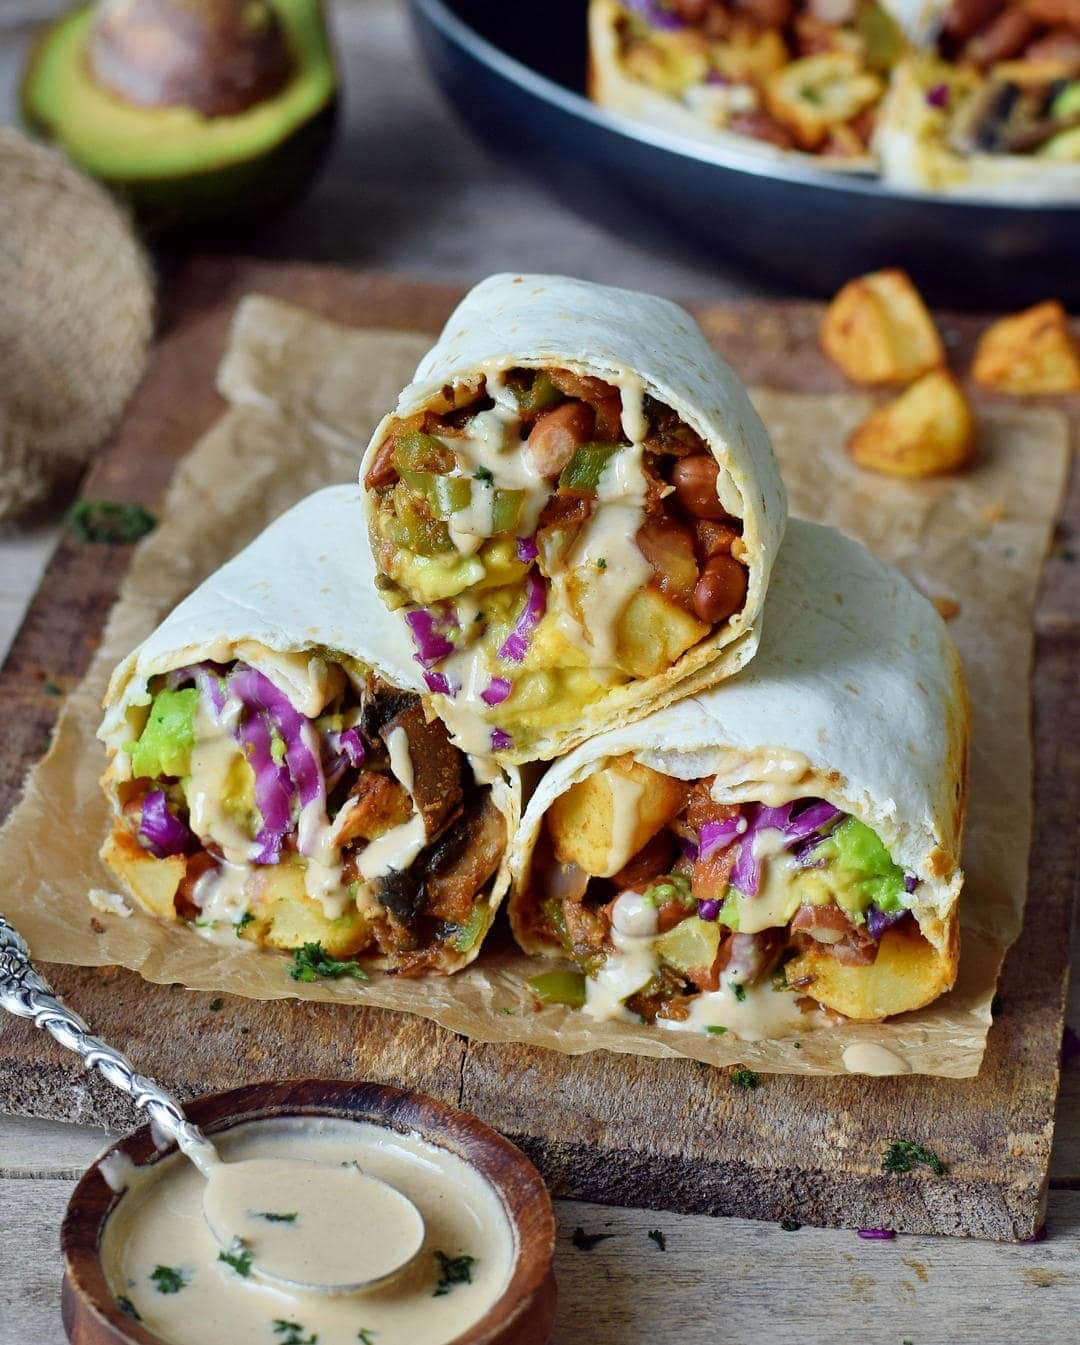 Sliced burritos loaded with roasted potatoes, avocado, mushrooms, and peppers.